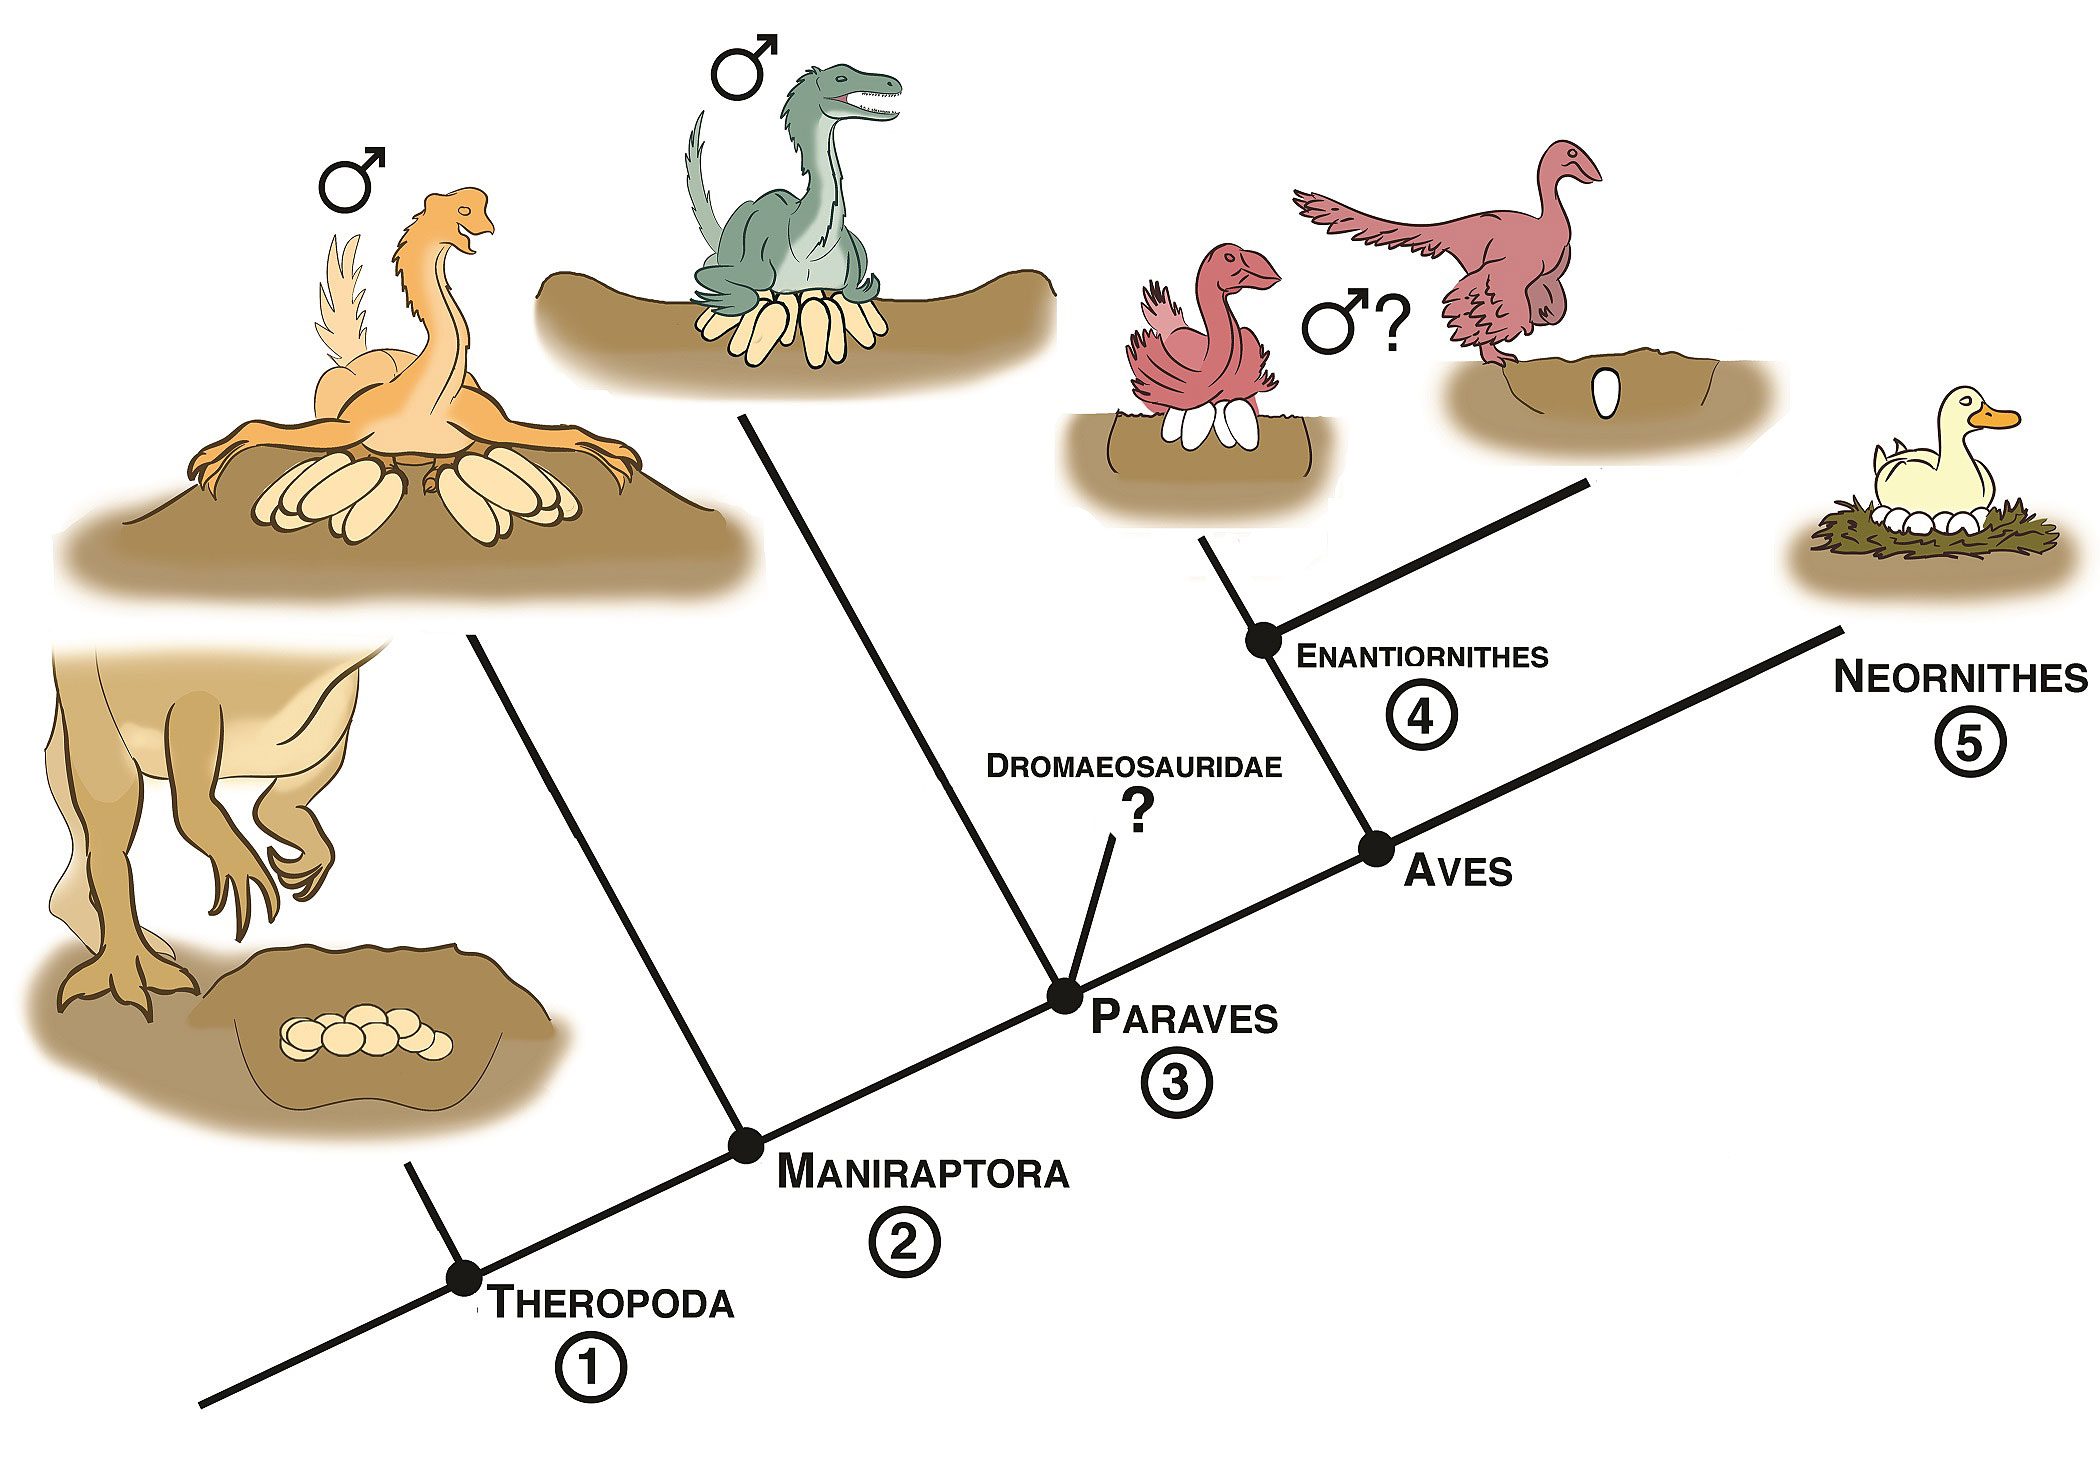 Evolution of dinosaurs and eggs Illustration by D. Anduza